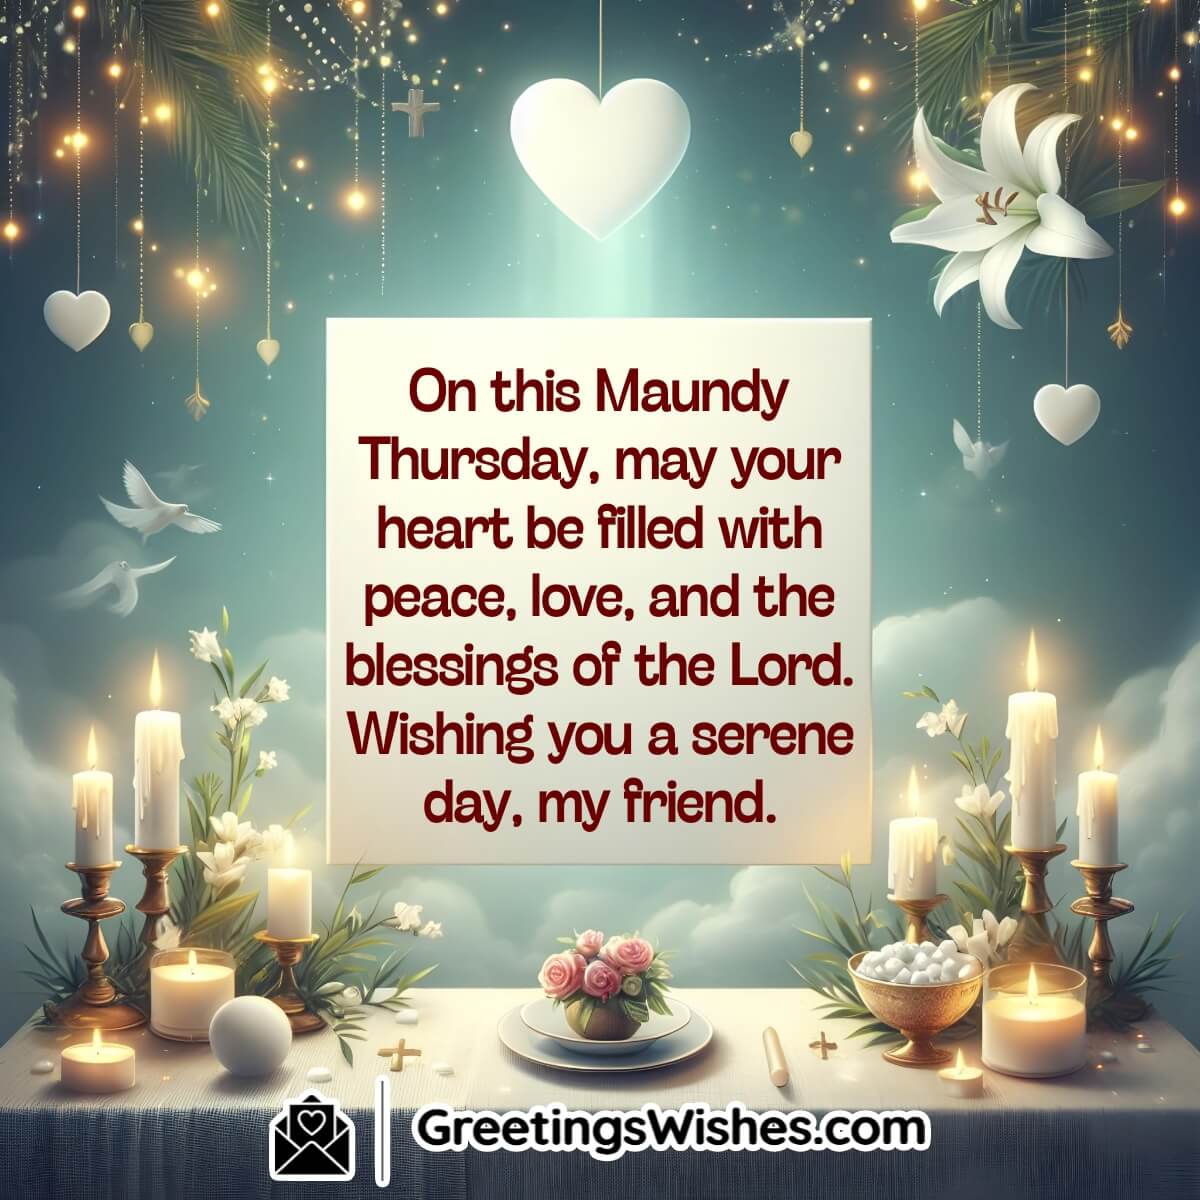 Maundy Thursday Wishes For Friends